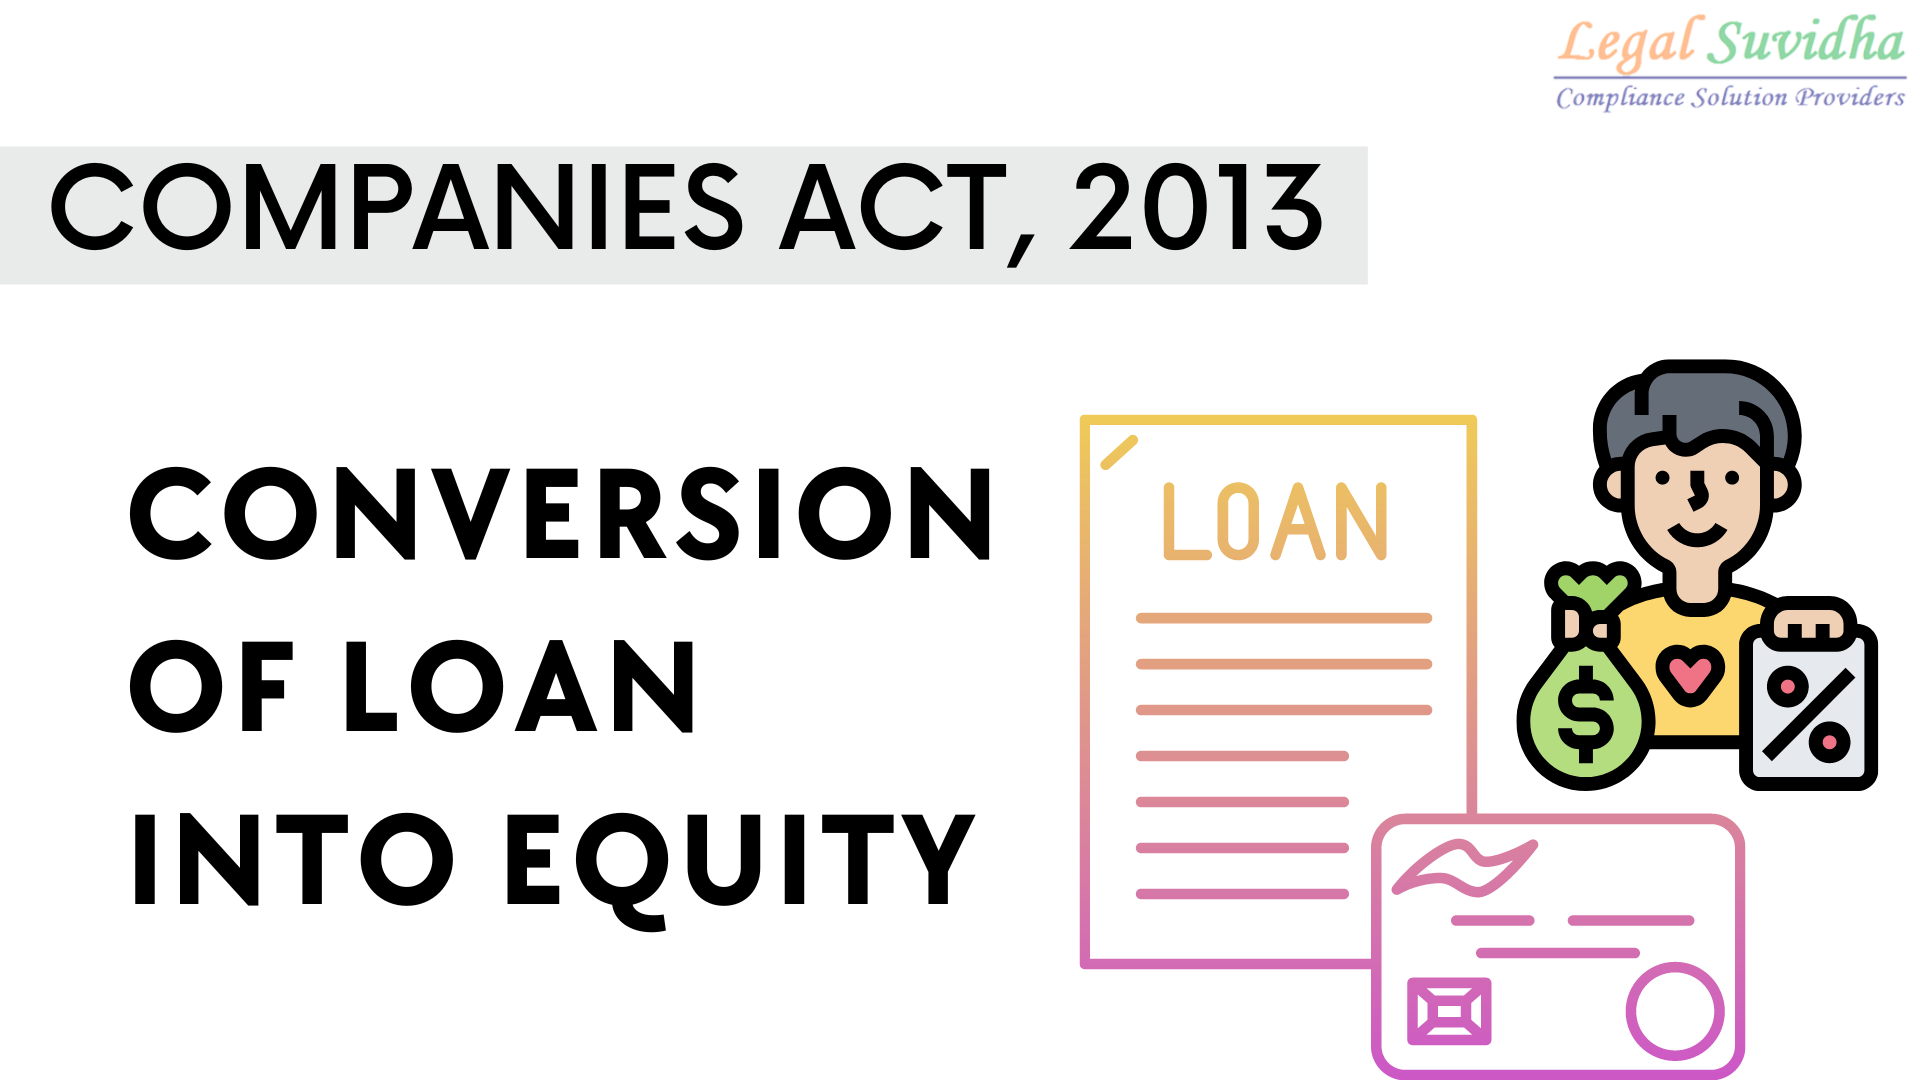 Conversion of Loan into Equity